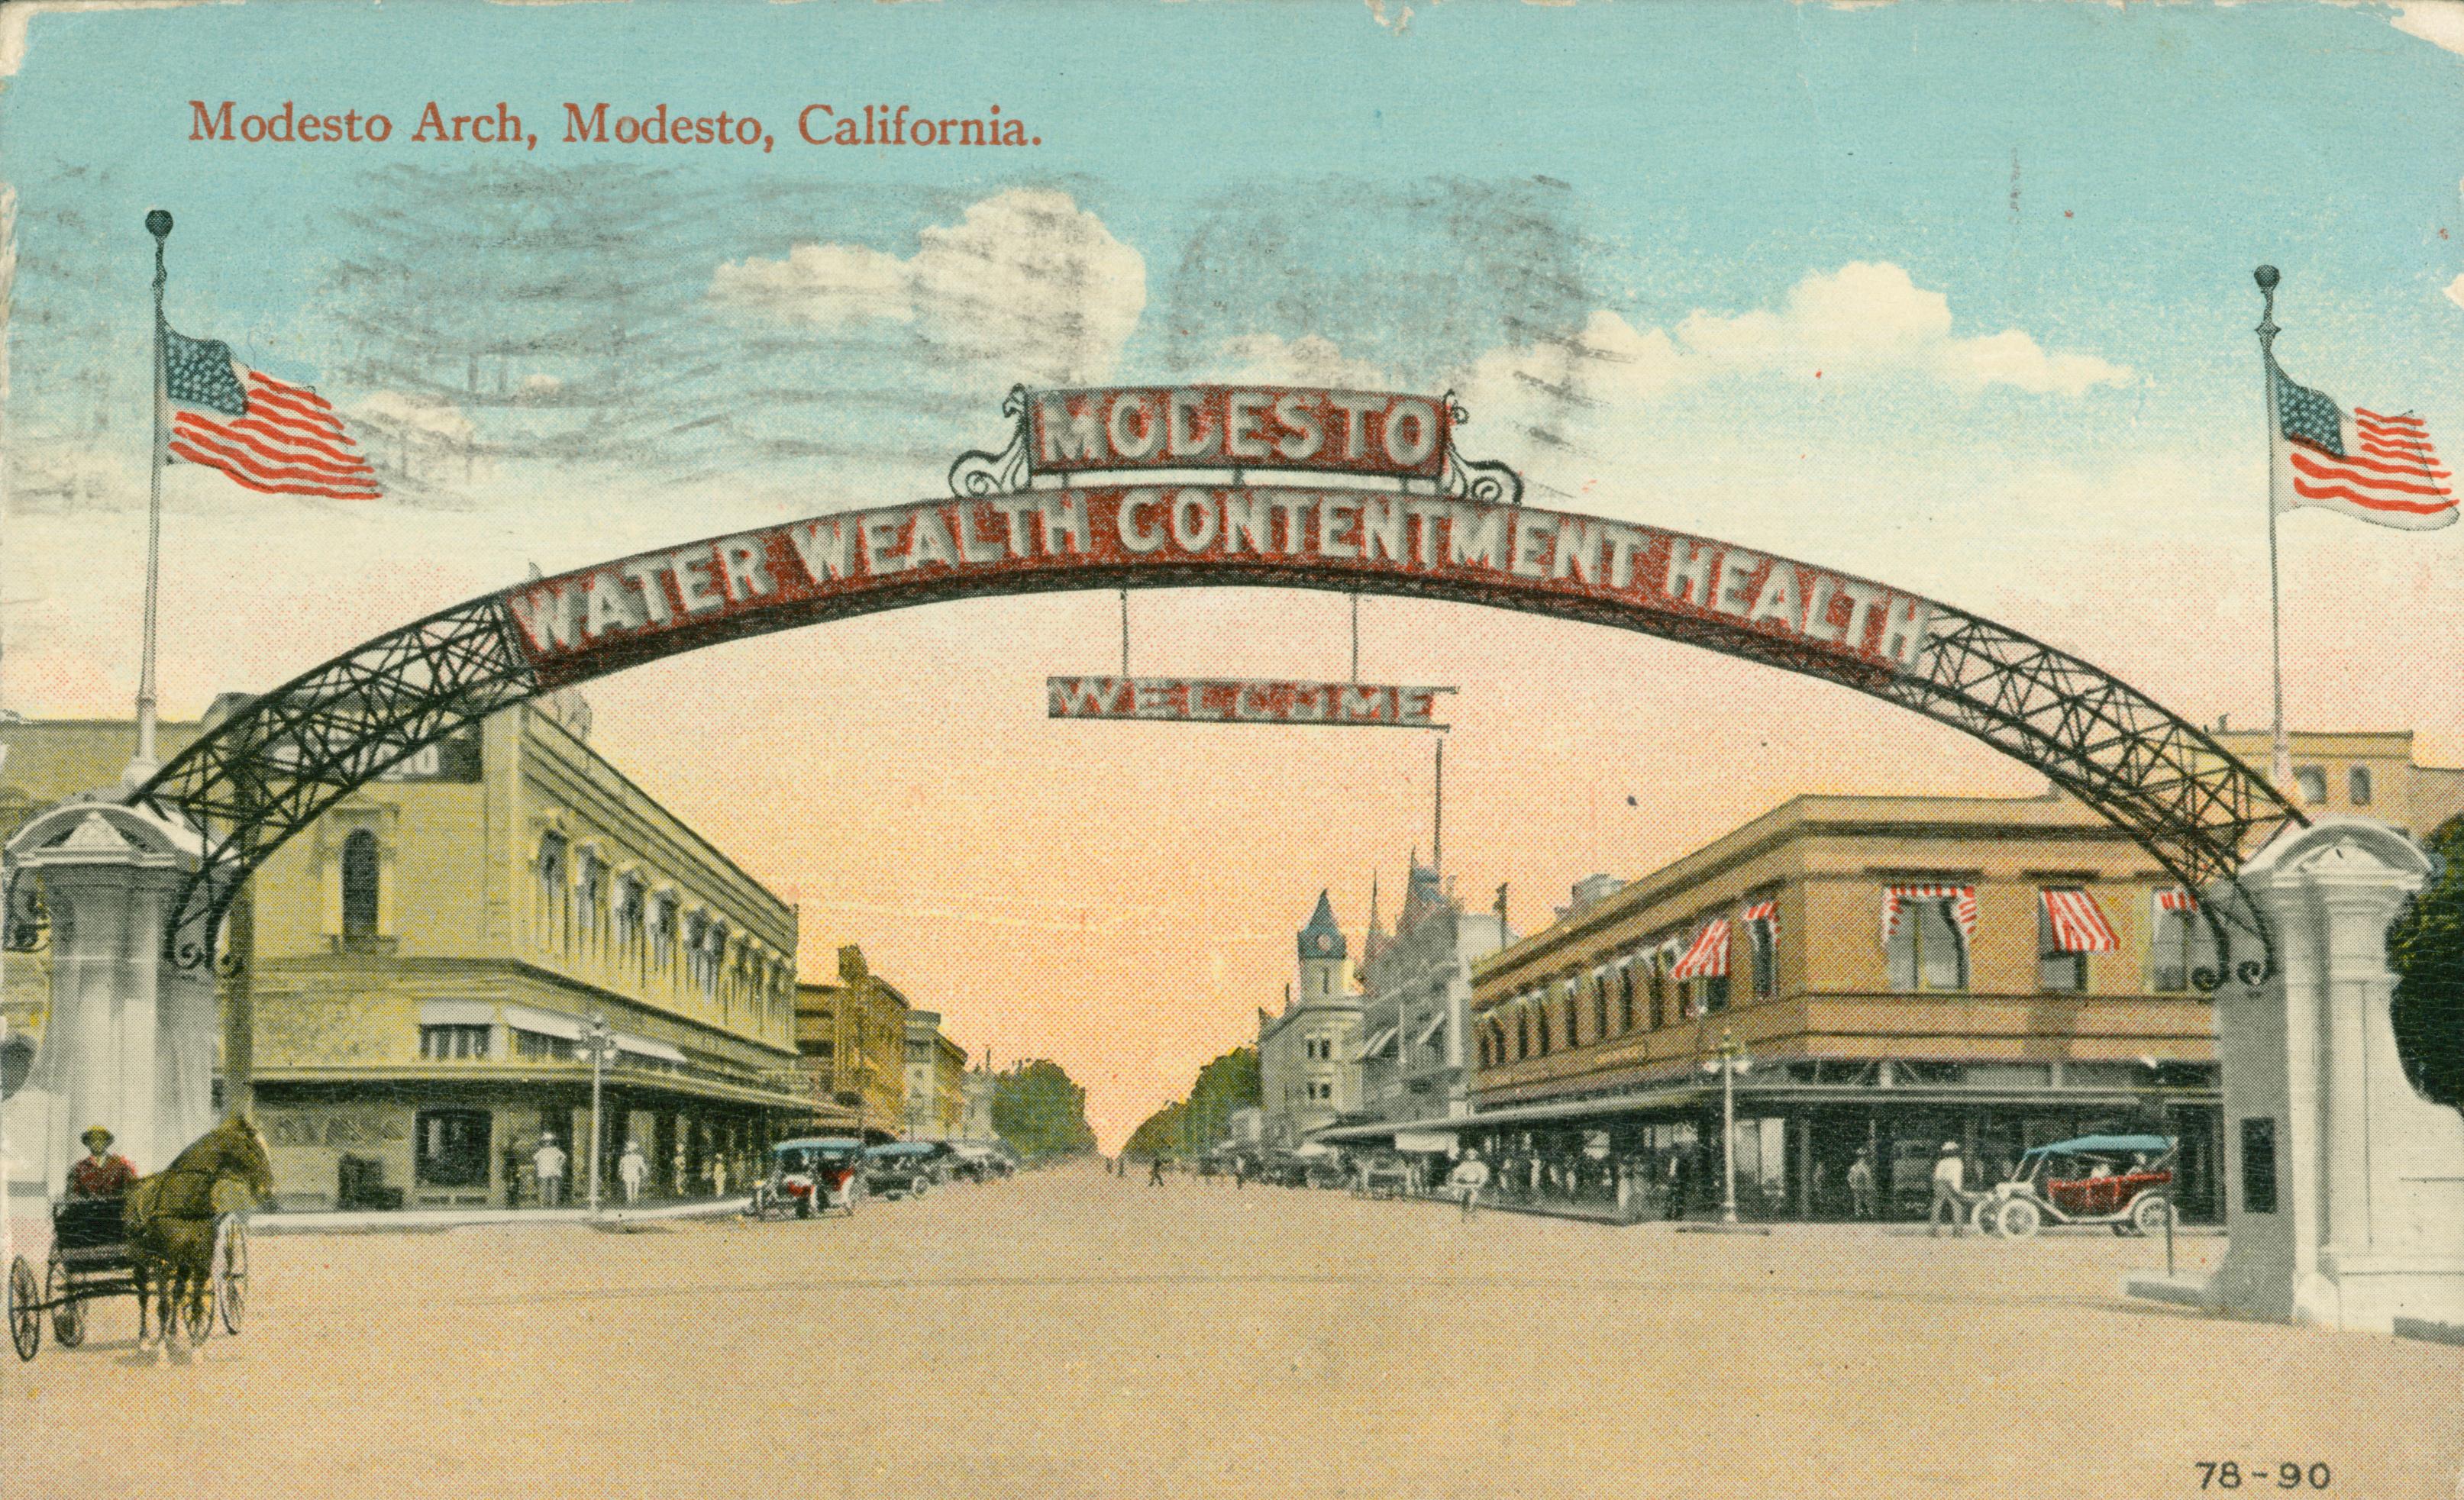 Shows the Modesto arch leading to a street lined with buildings